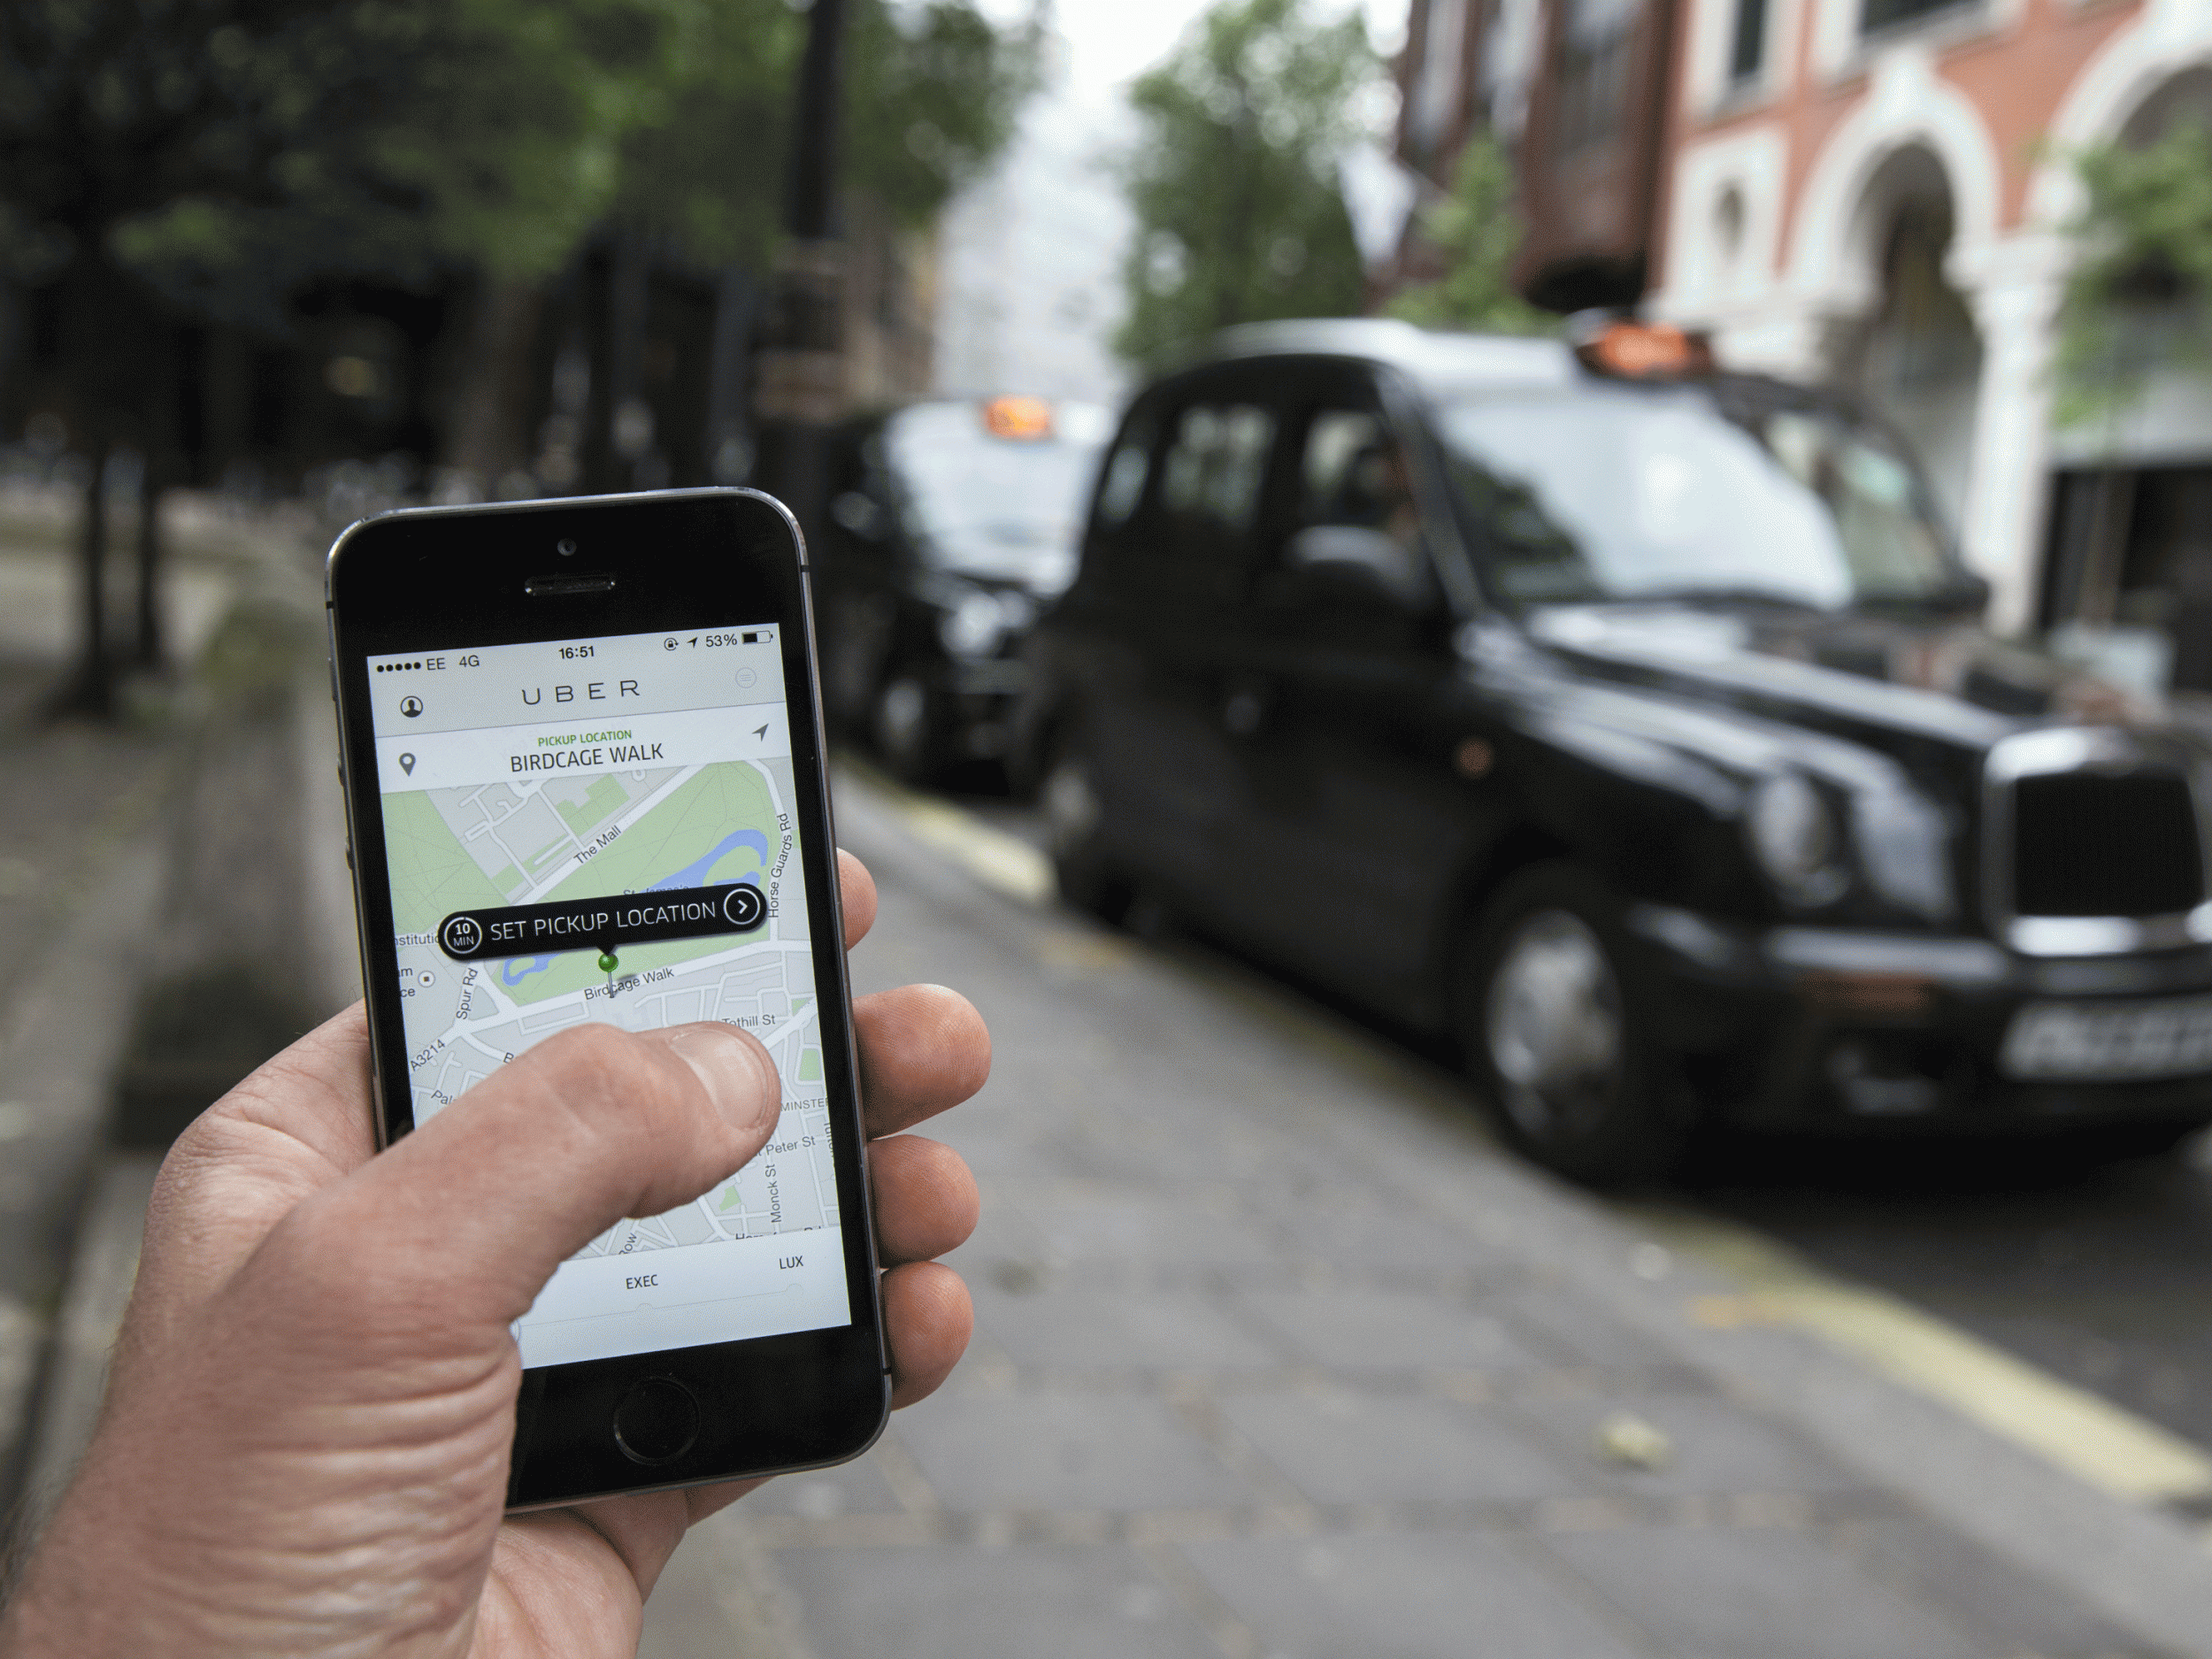 Uber has been hit by a series of high-profile assault claims against drivers